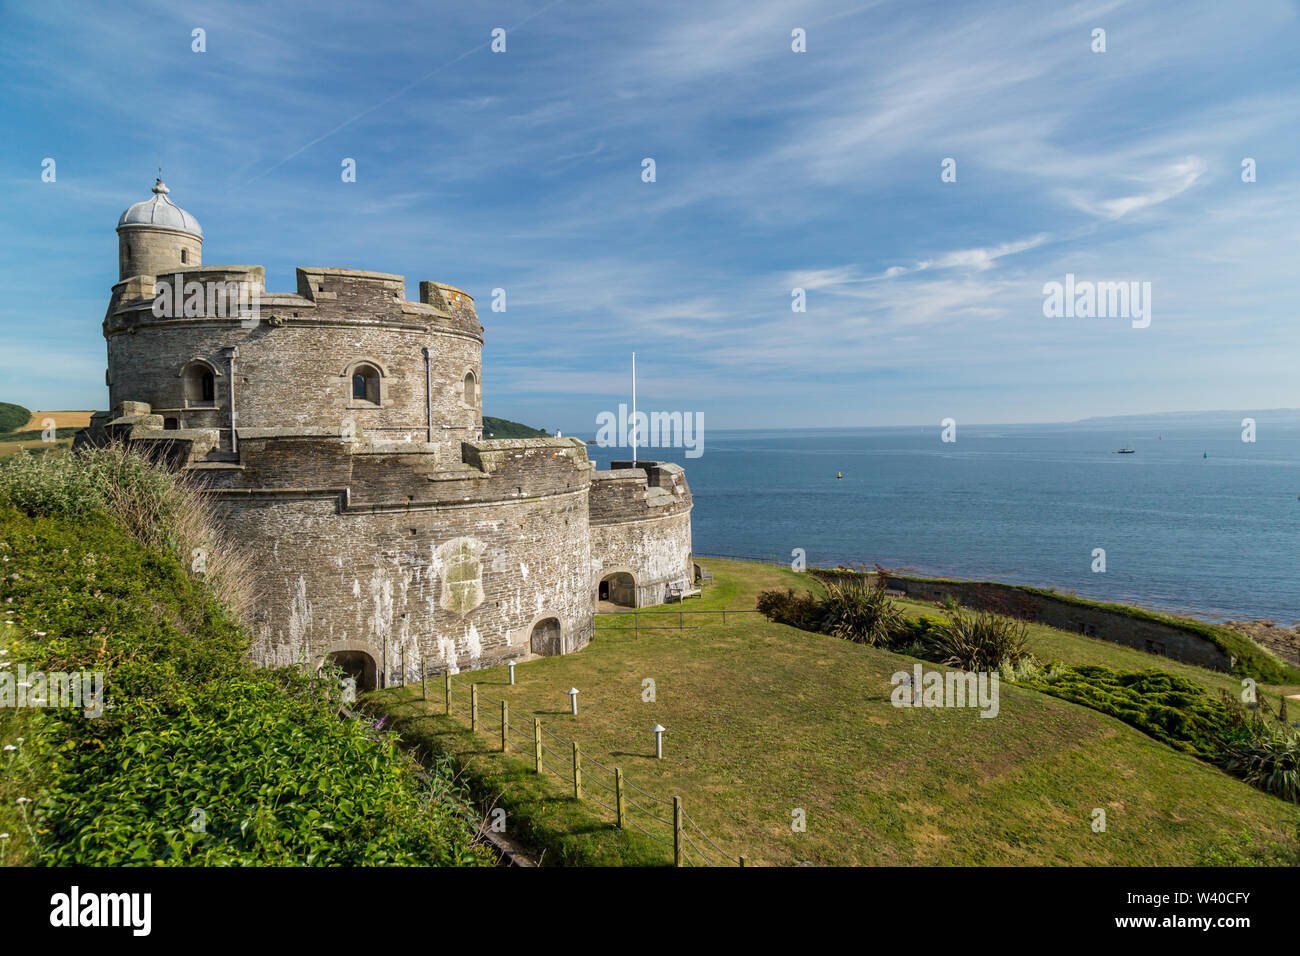 St. Mawes castle in Cornwall, England. Stock Photo